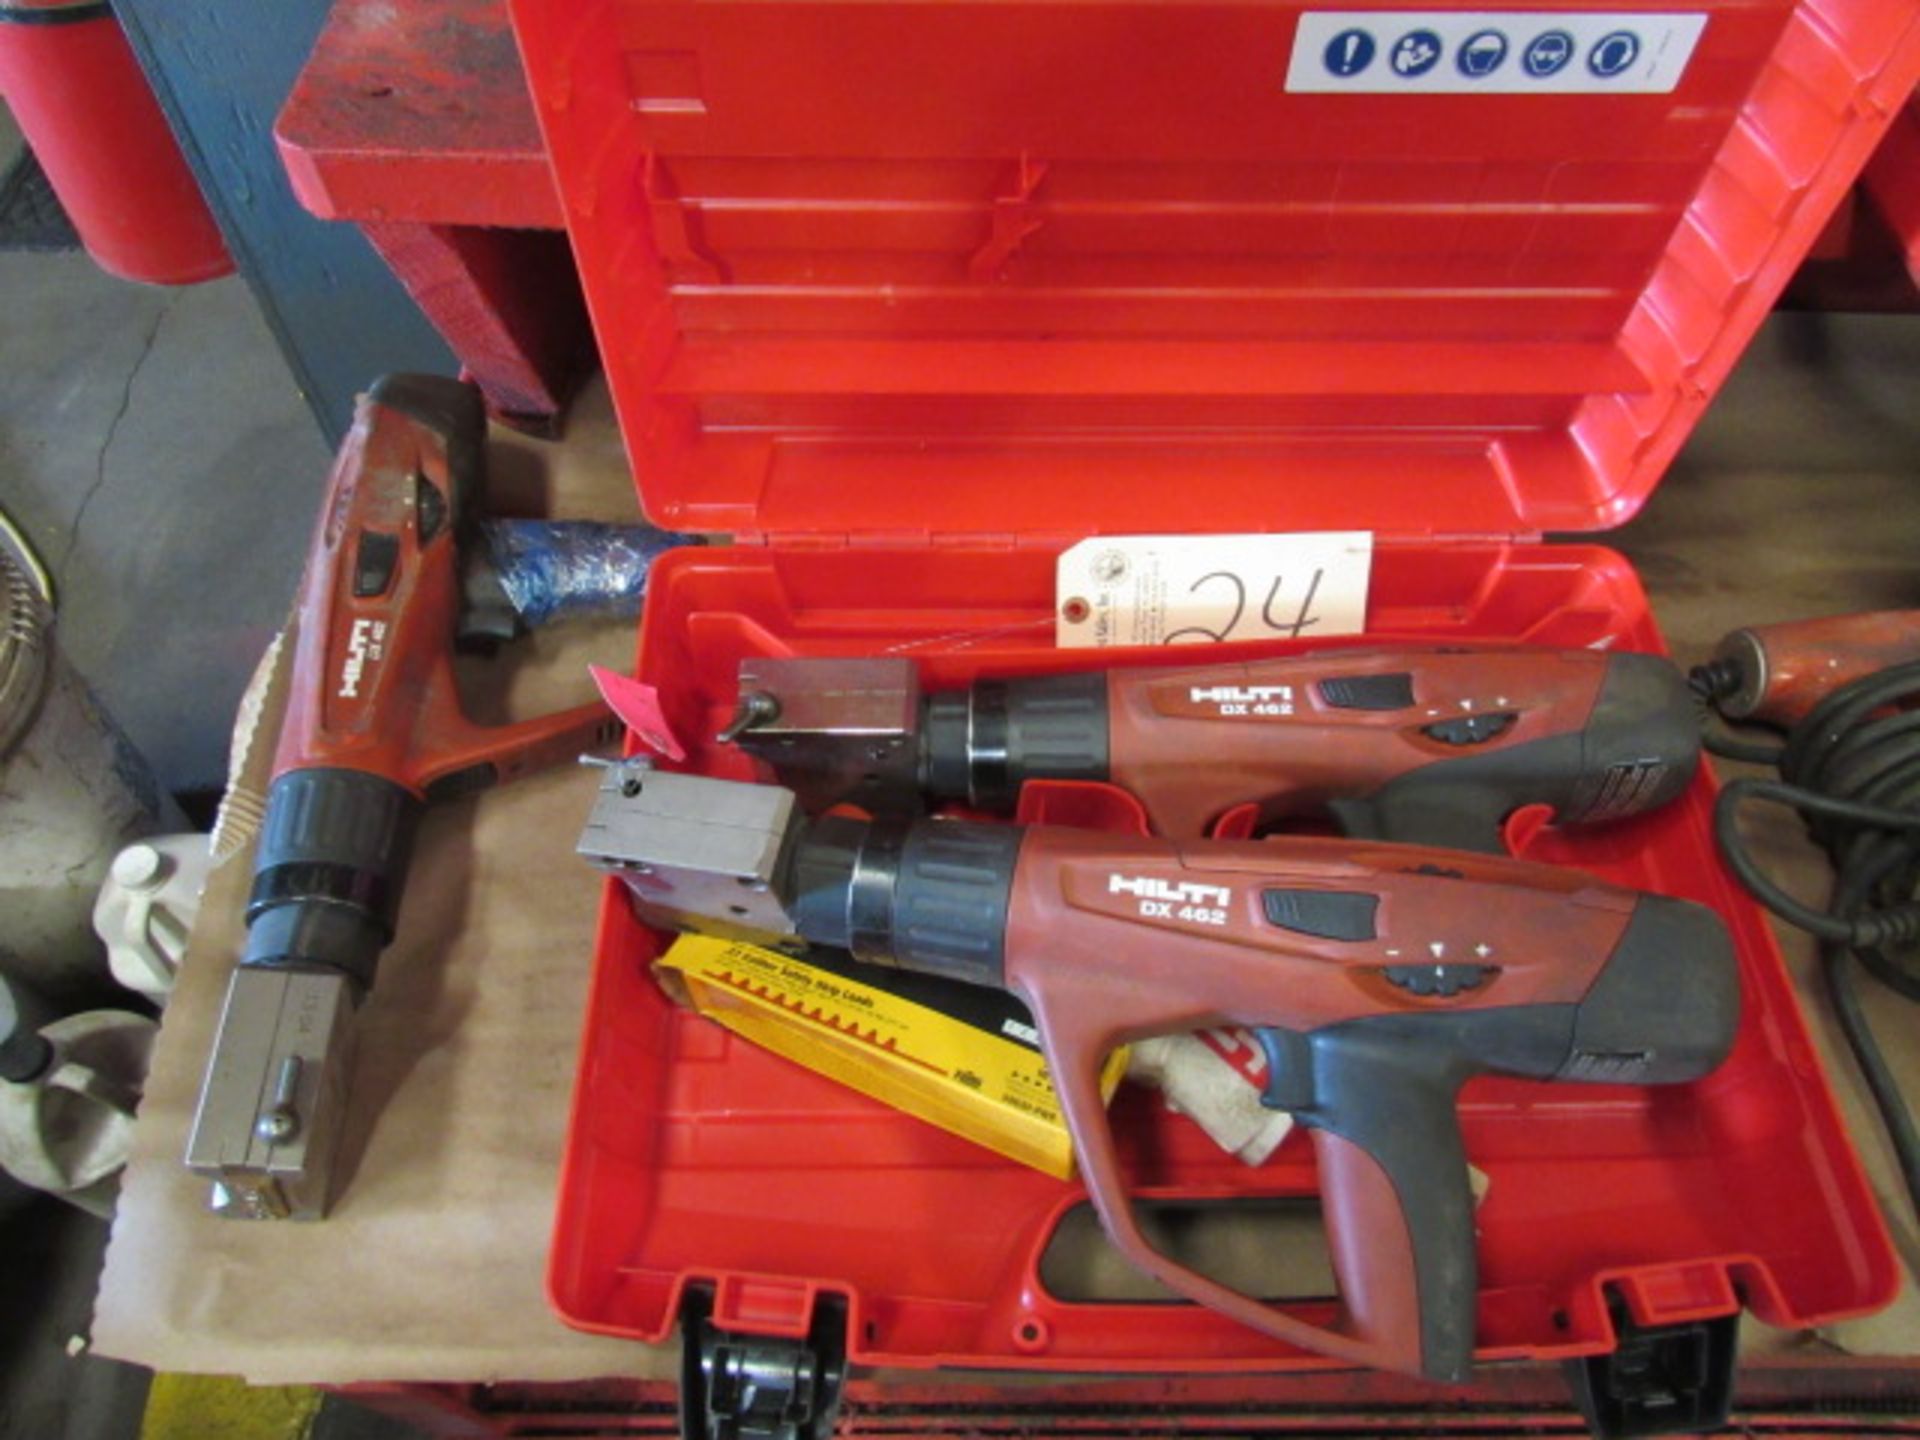 (3) Hilti DX462 Direct Powder Actuated Fastening Tools